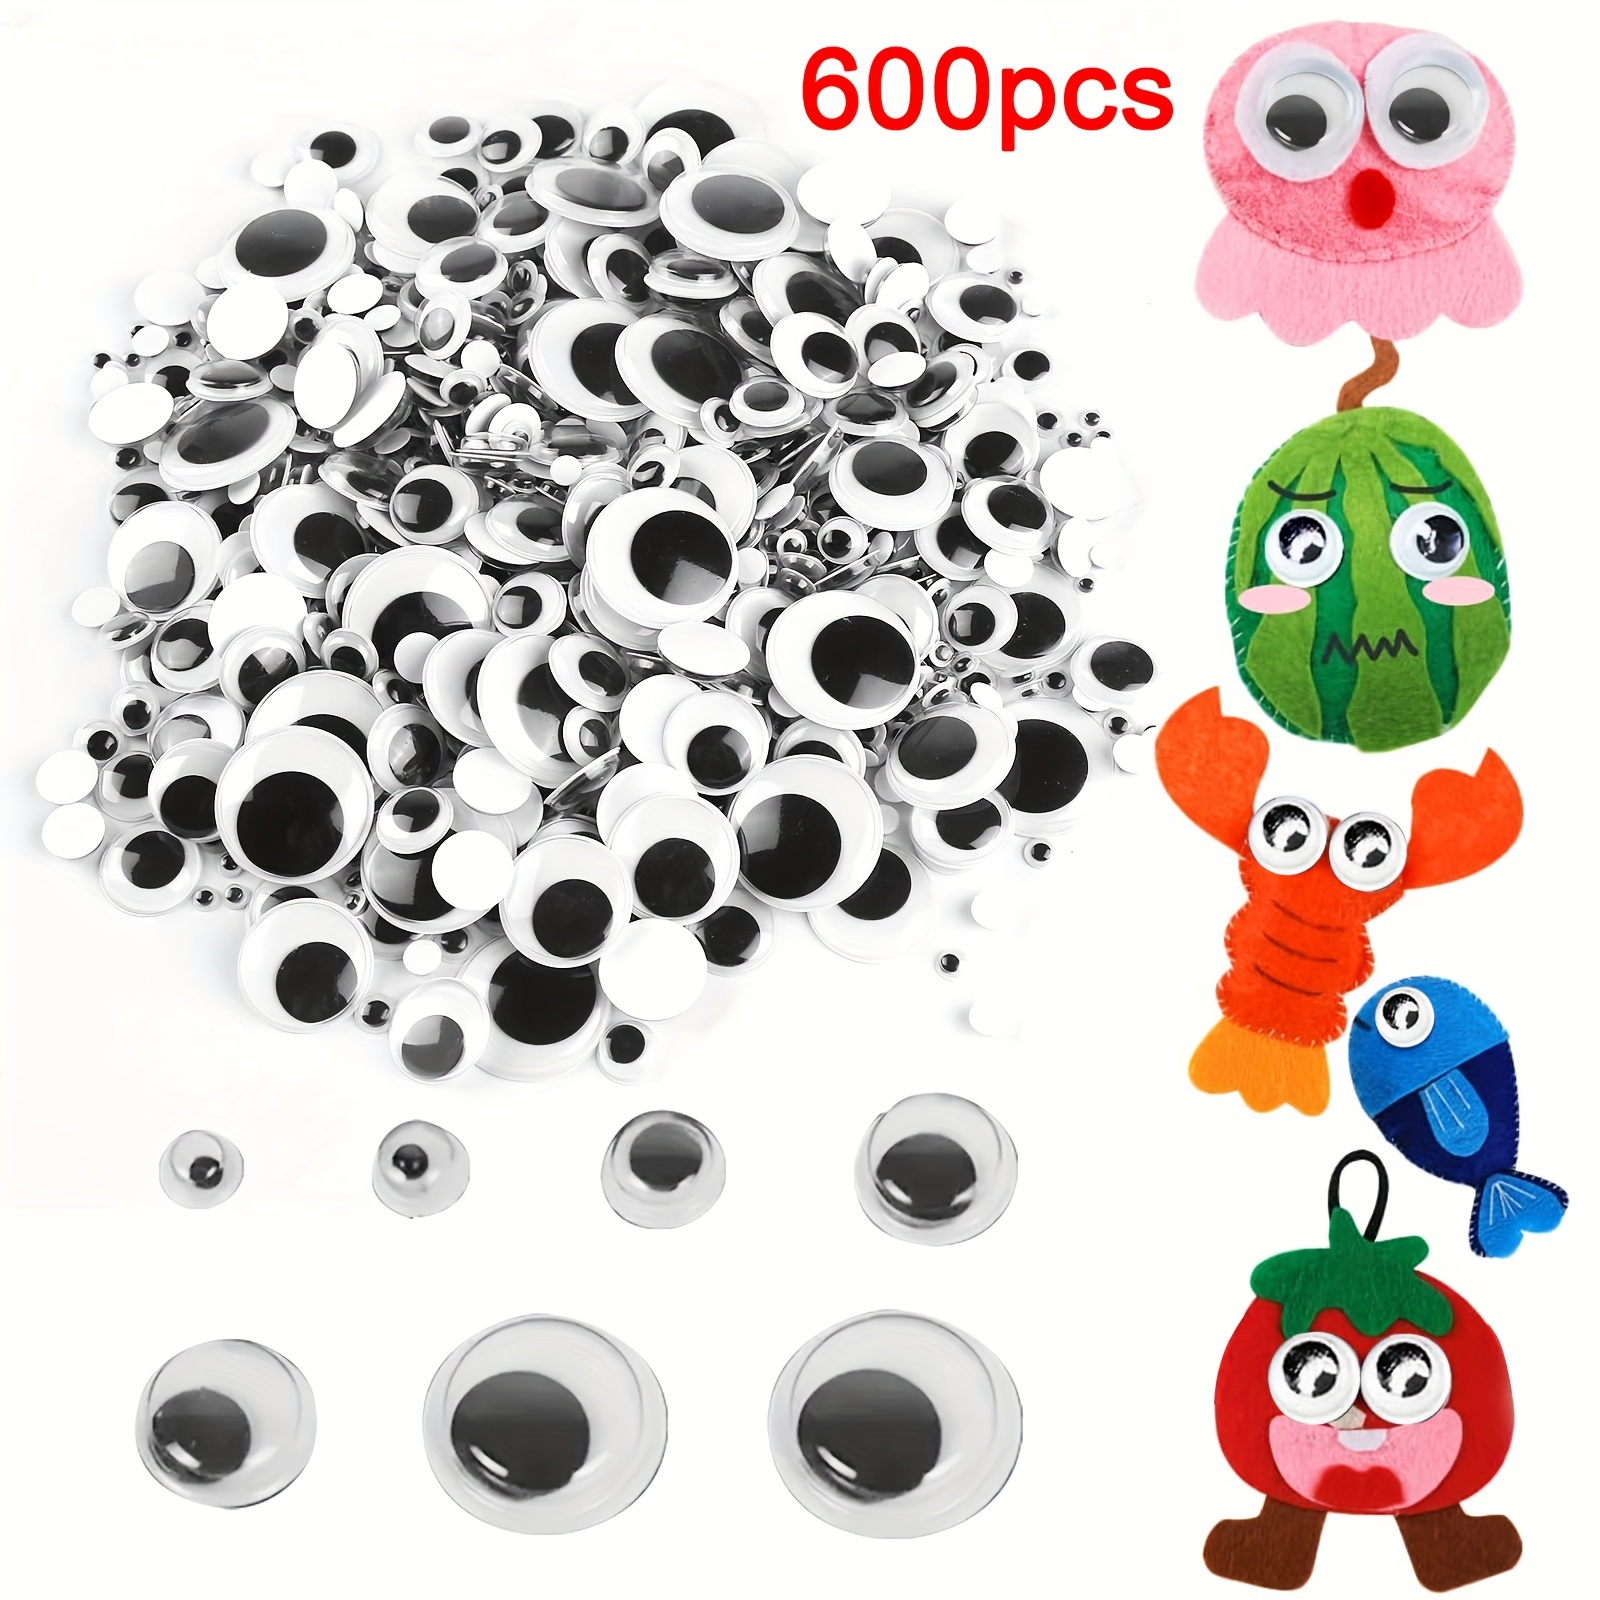 10pcs 50mm Wiggly Wobbly Googly Eyes Scrapbooking Crafts For Doll